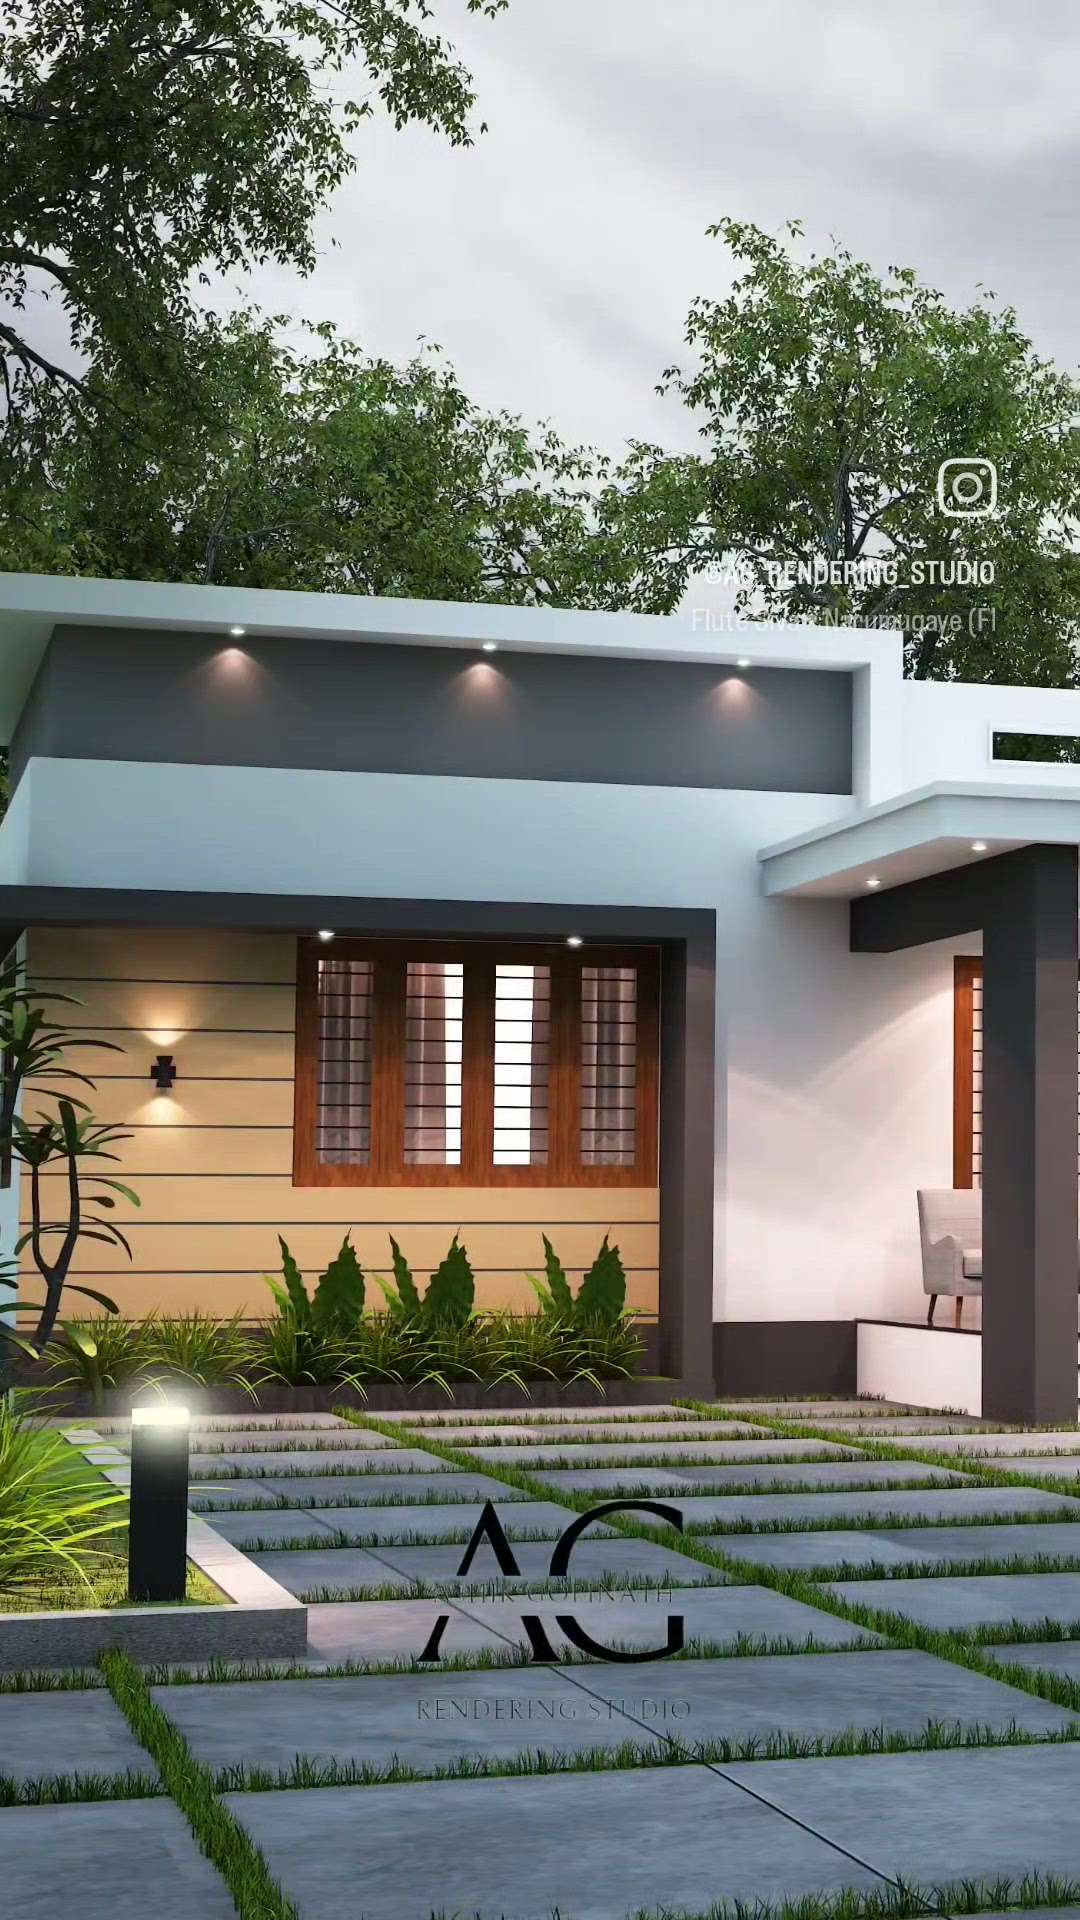 budget Home 🏠💕💕
#3D_ELEVATION #3dhouse #3Darchitecture #3dbuilding #3delevationhome #3delevations #3delivation #3drendering #KeralaStyleHouse #keralahomedesignz #keralahomeplans #kerala_architecture #keraladesigns #keralaveedu #budgethomeplan #veedupani #veedu #veeddesign